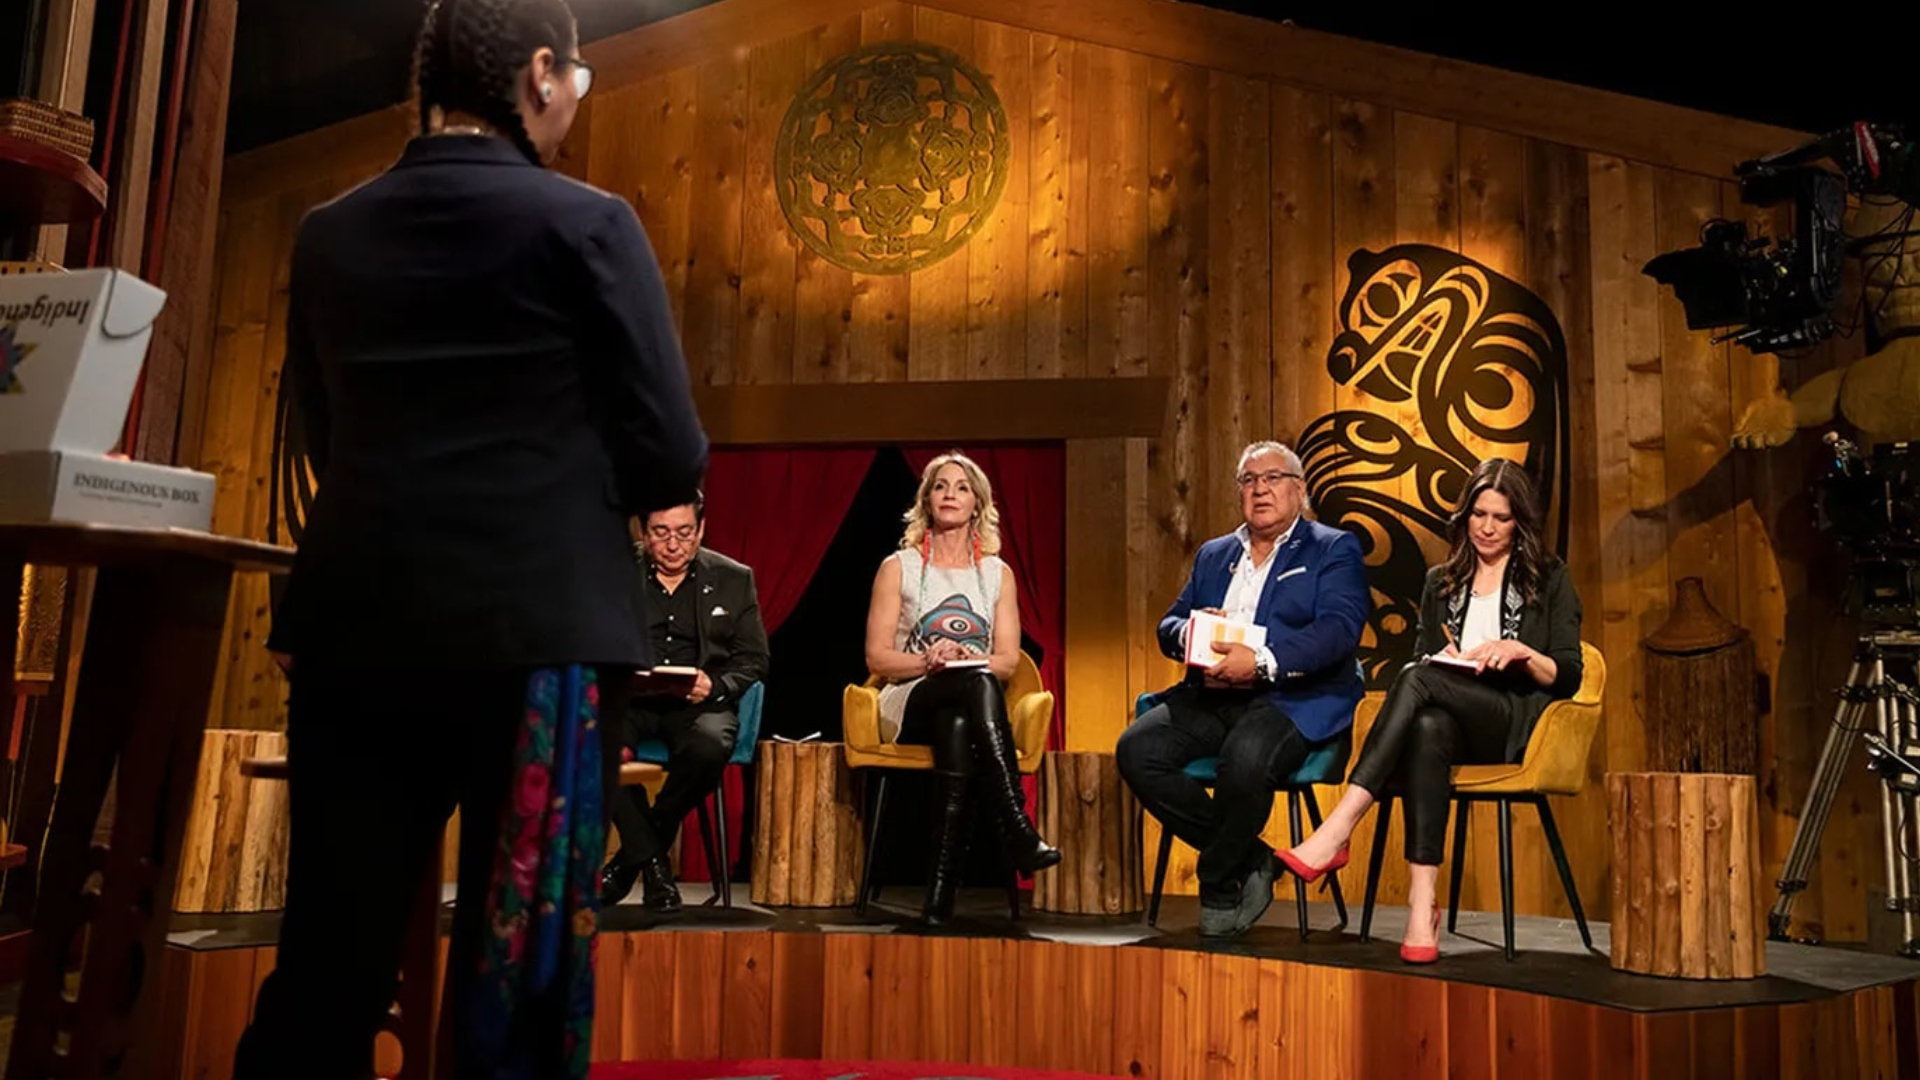 Indigenous entrepreneurs are showcased on reality show ‘Bears’ Lair’